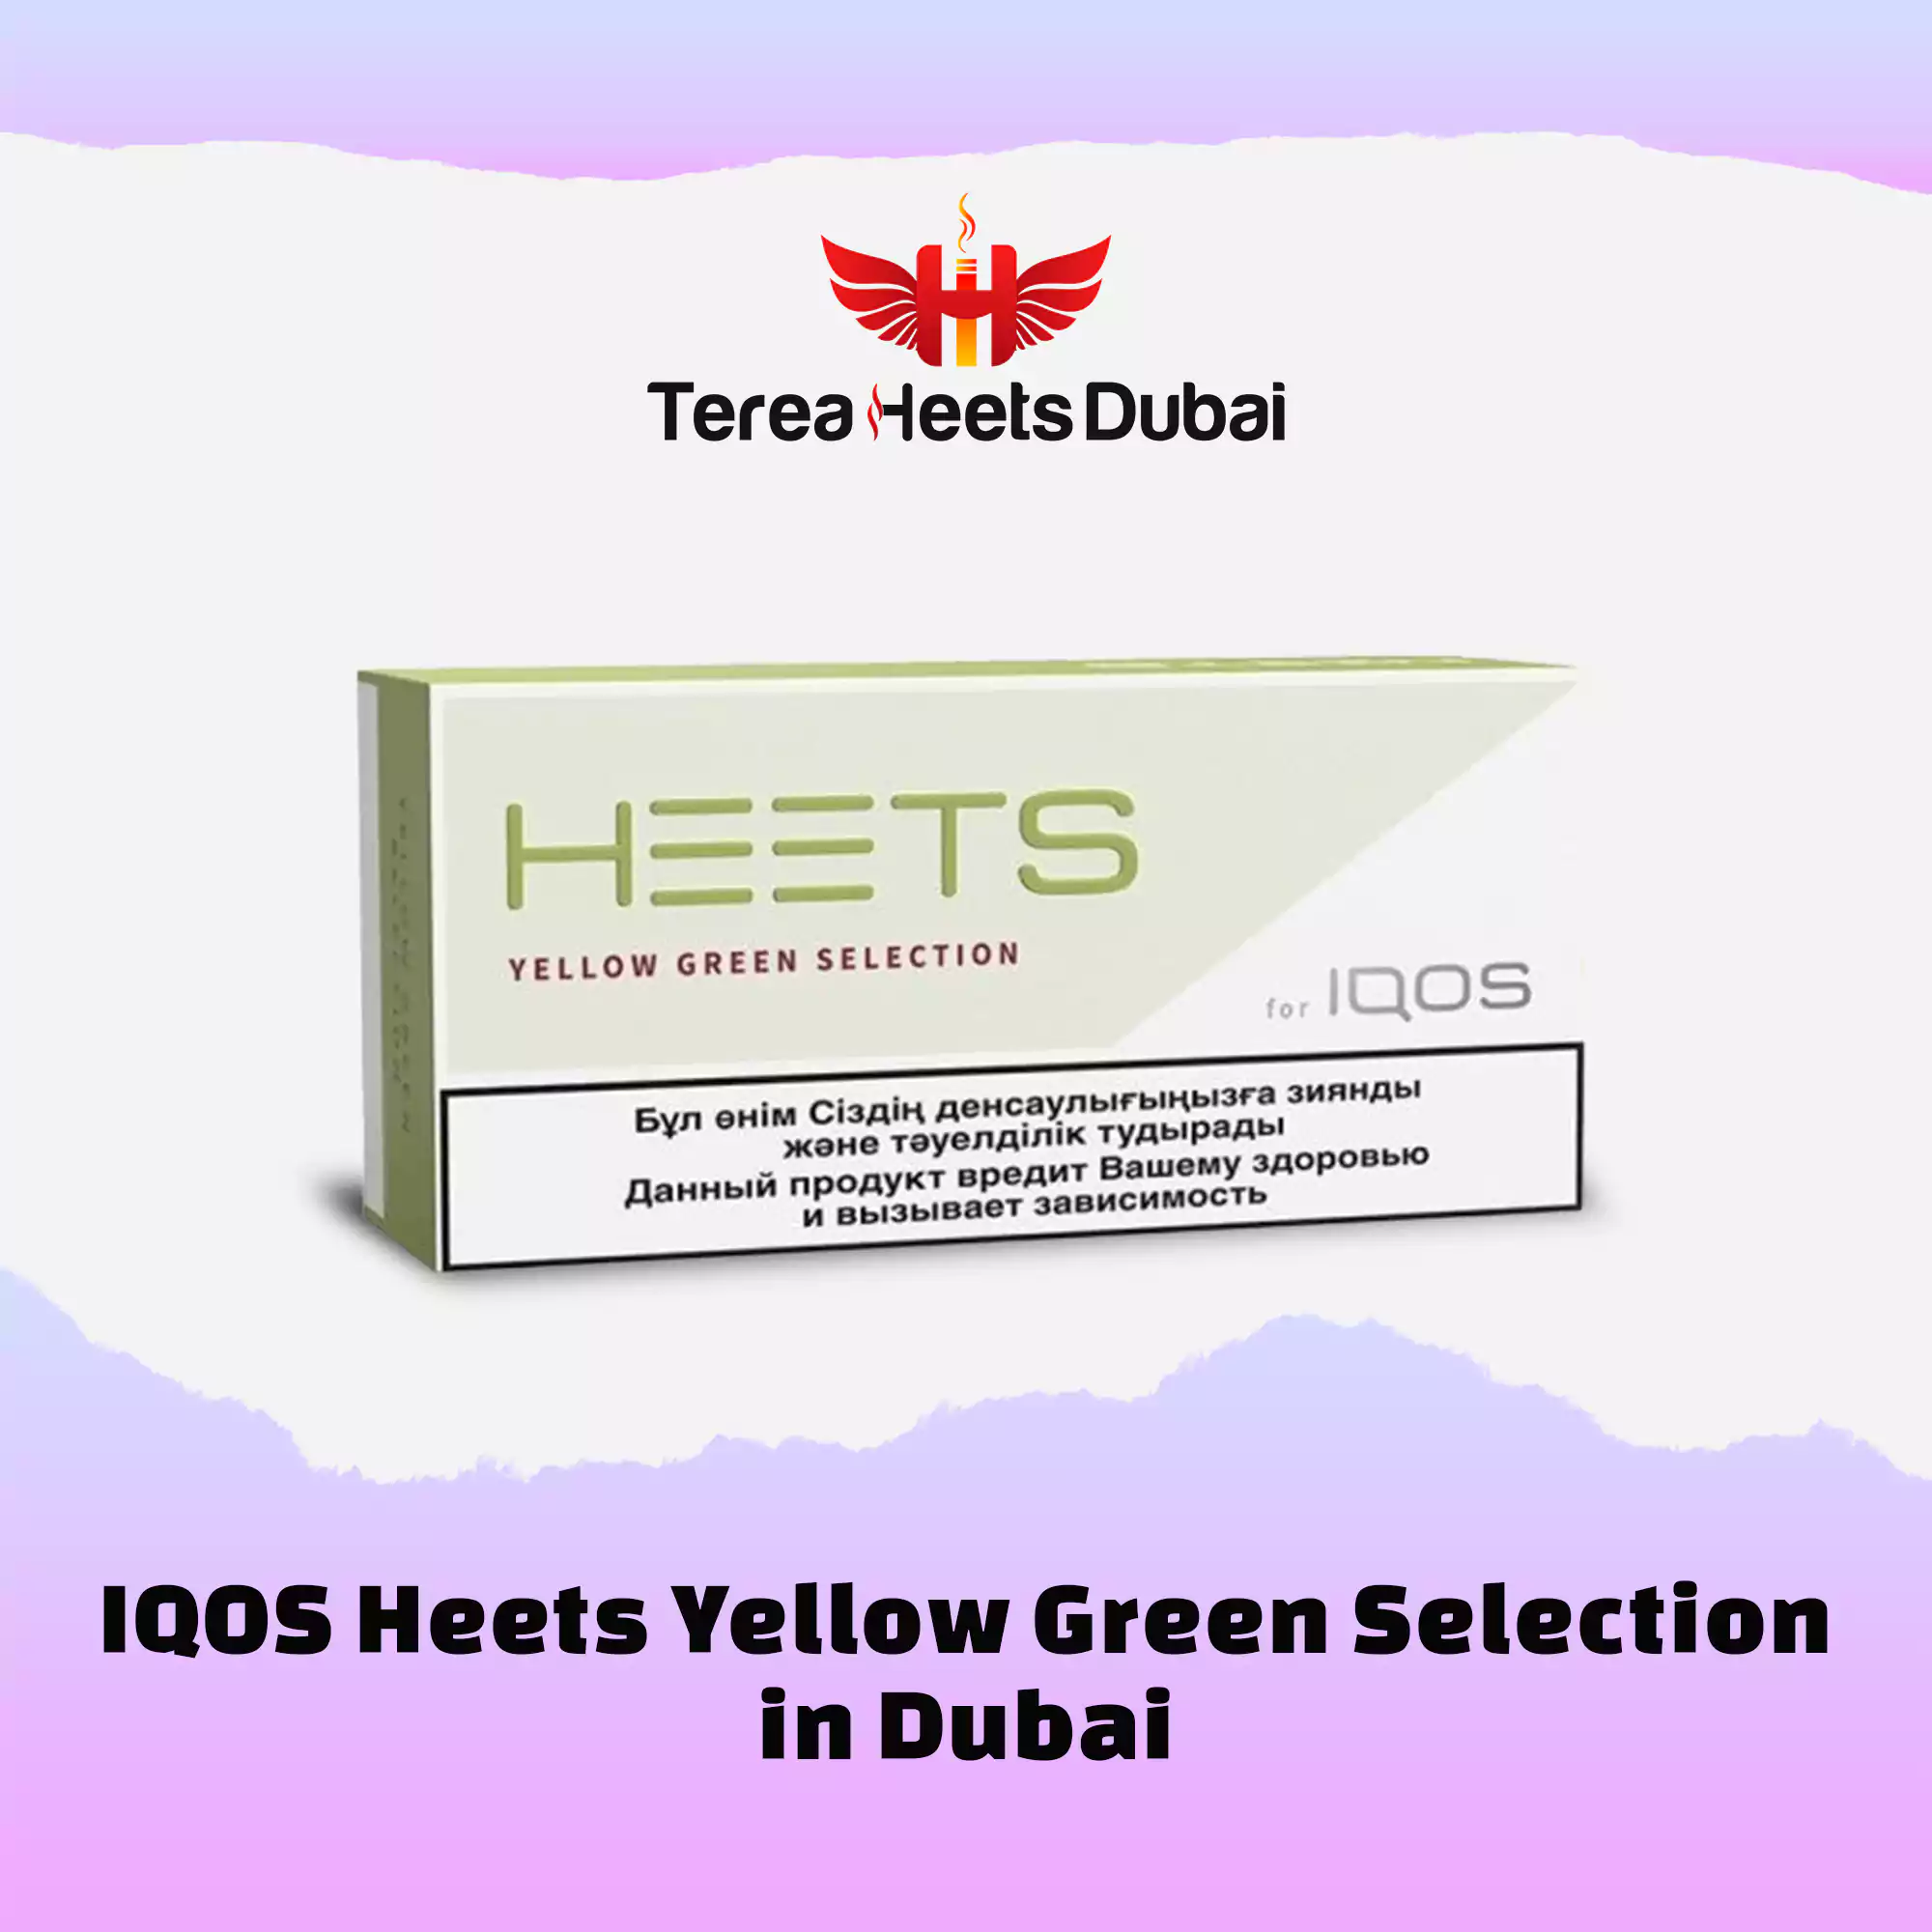 IQOS Heets Yellow Green Selection in Dubai